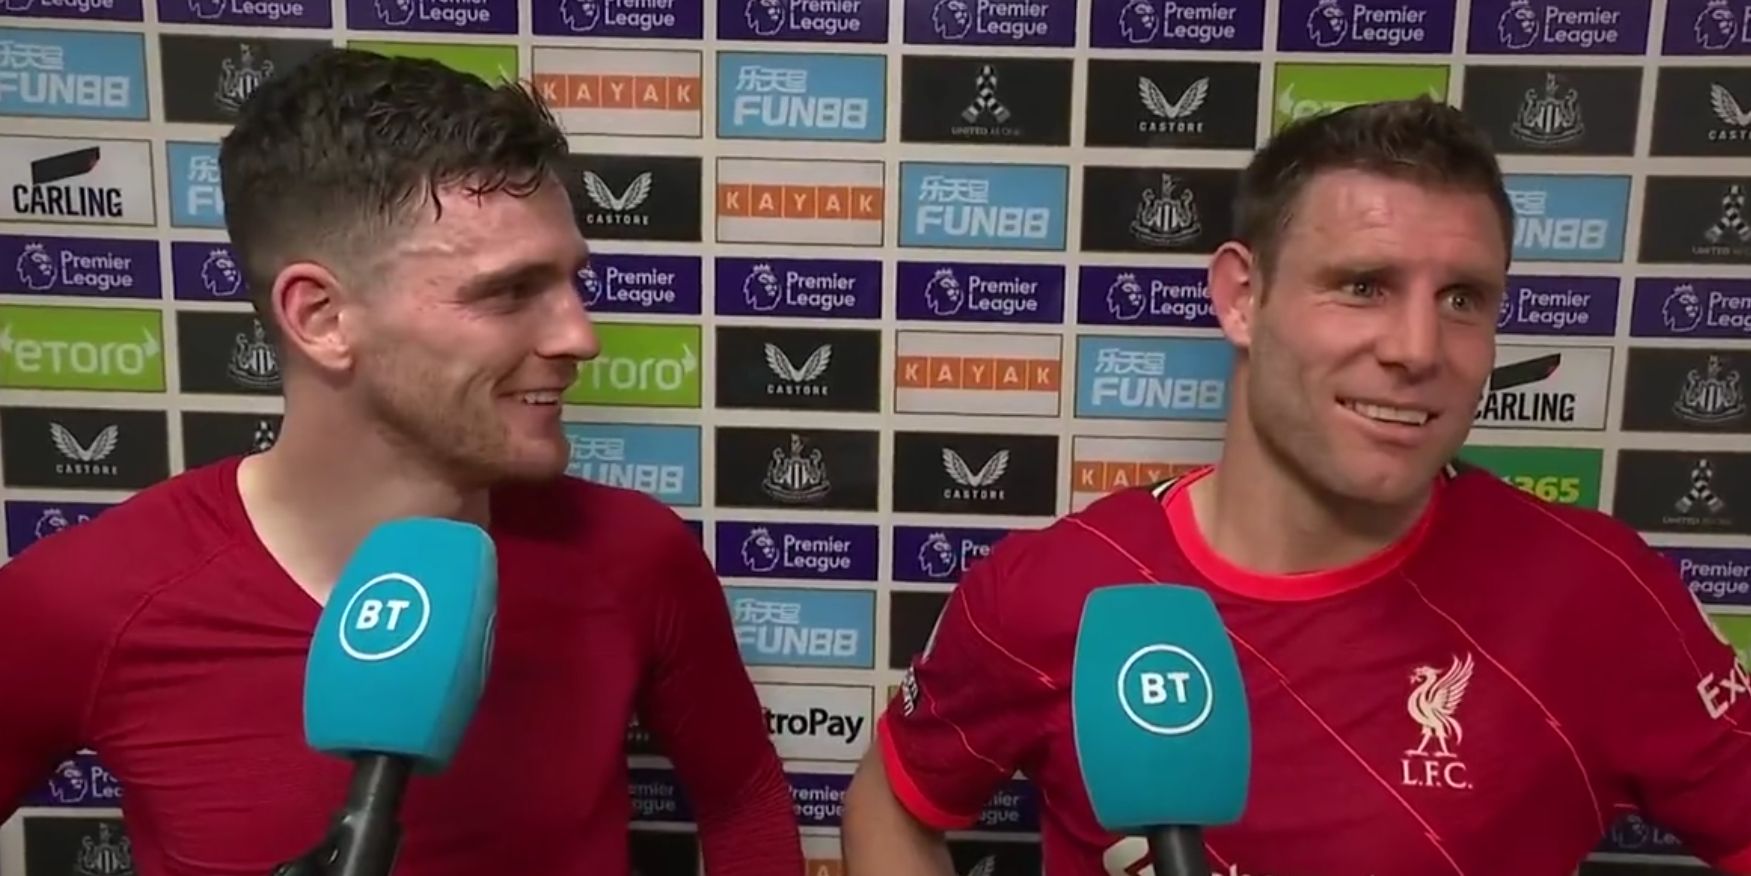 (Video) “Well done you, James!” – Andy Robertson’s hilarious reaction to discovering that James Milner won man of the match